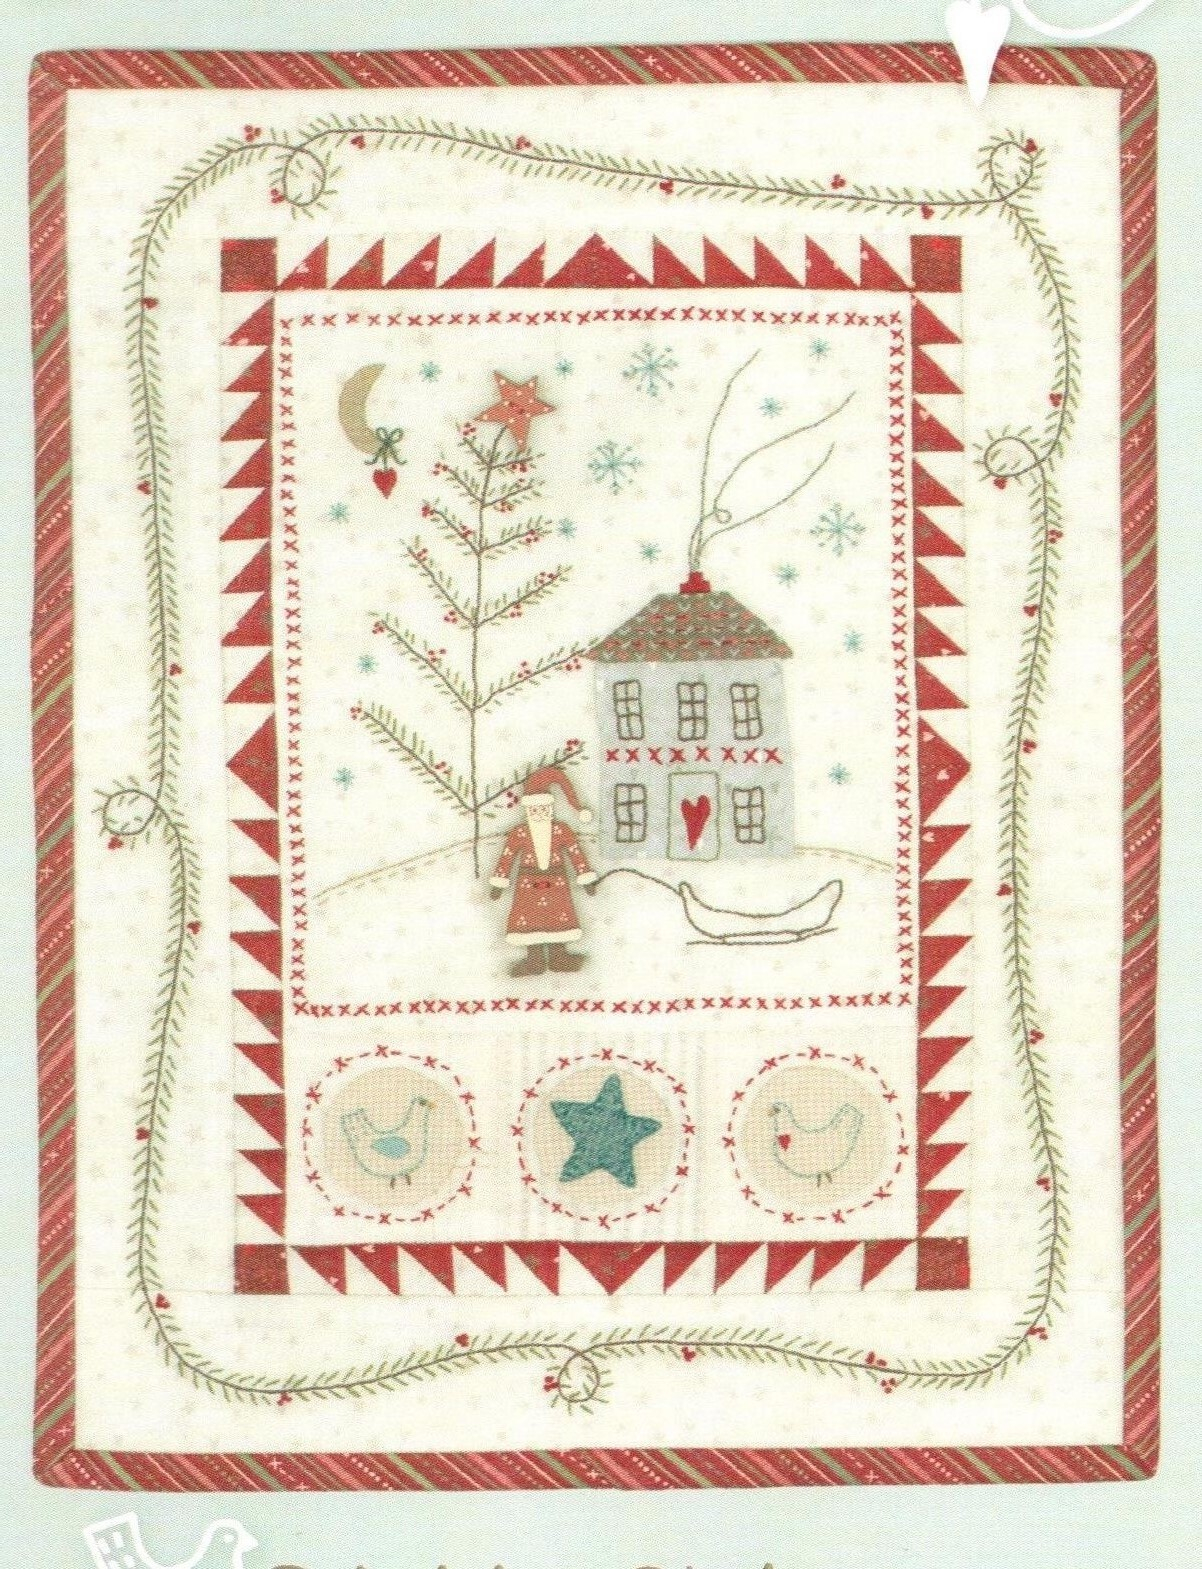 Primitive Embroidery Patterns Free Primitive Christmas Quilt And Embroidery Pattern With Hand Painted Jolly Santa Button Pack